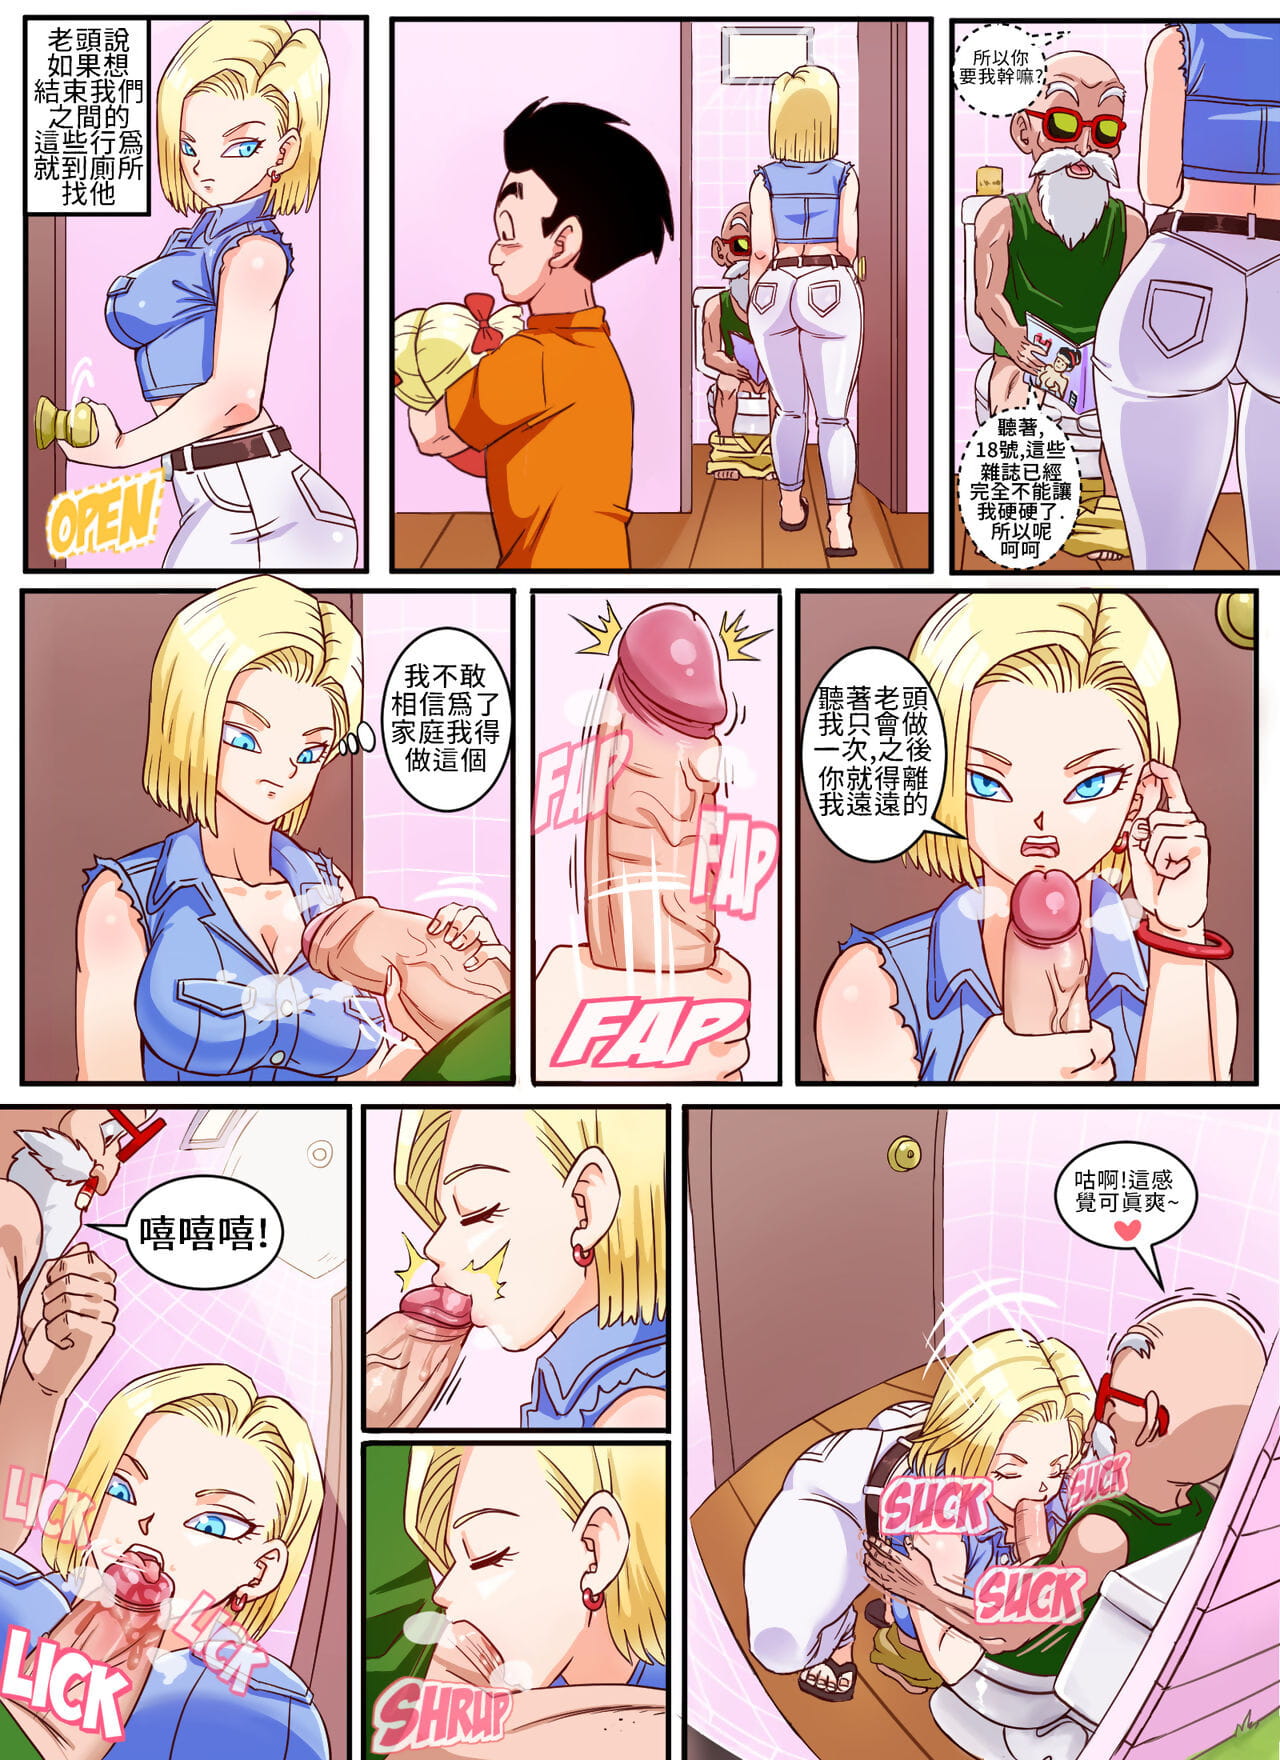 Android 18 & Master Roshi - 18????? page 1